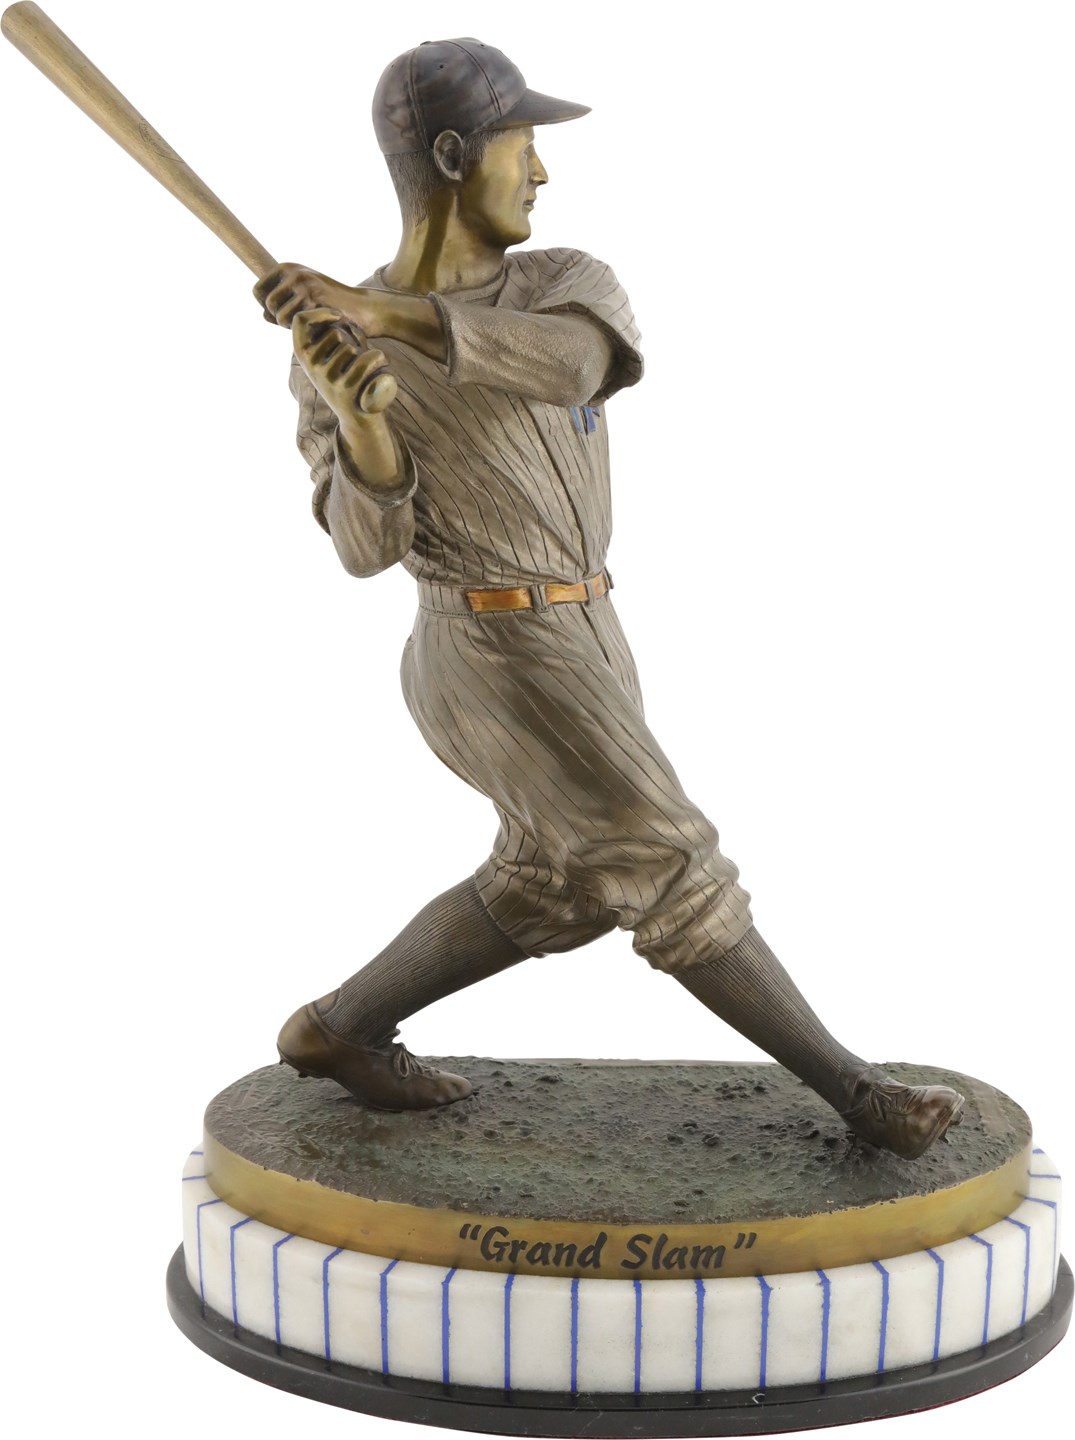 1988 Lou Gehrig Bronze Statue by Noted Sculptor R. P. Daus